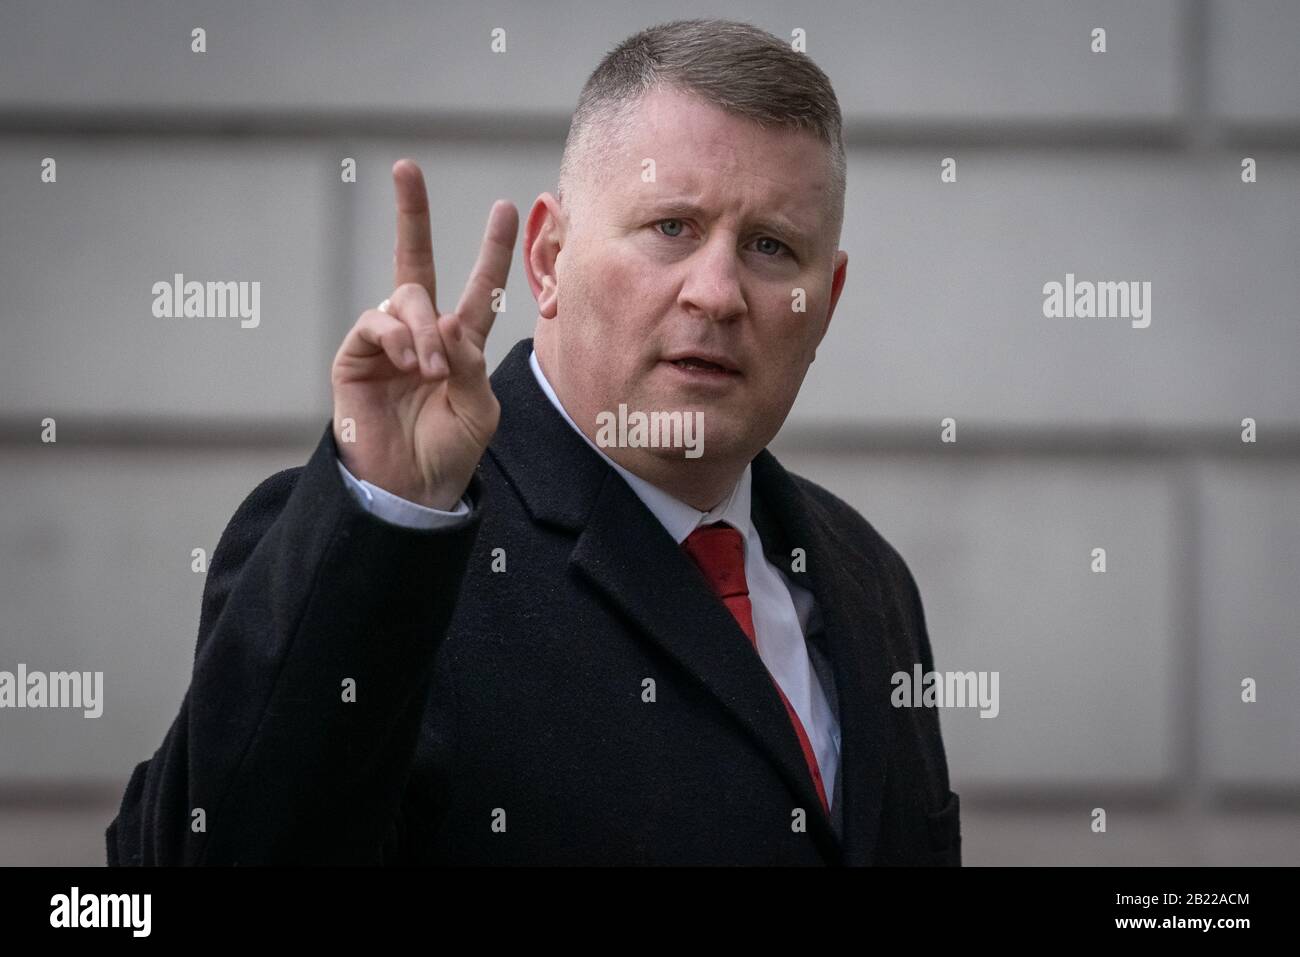 Britain First leader Paul Golding arrives at Westminster Magistrates’ Court charged with Section 7 offence under the Terrorism Act. London, UK. Stock Photo